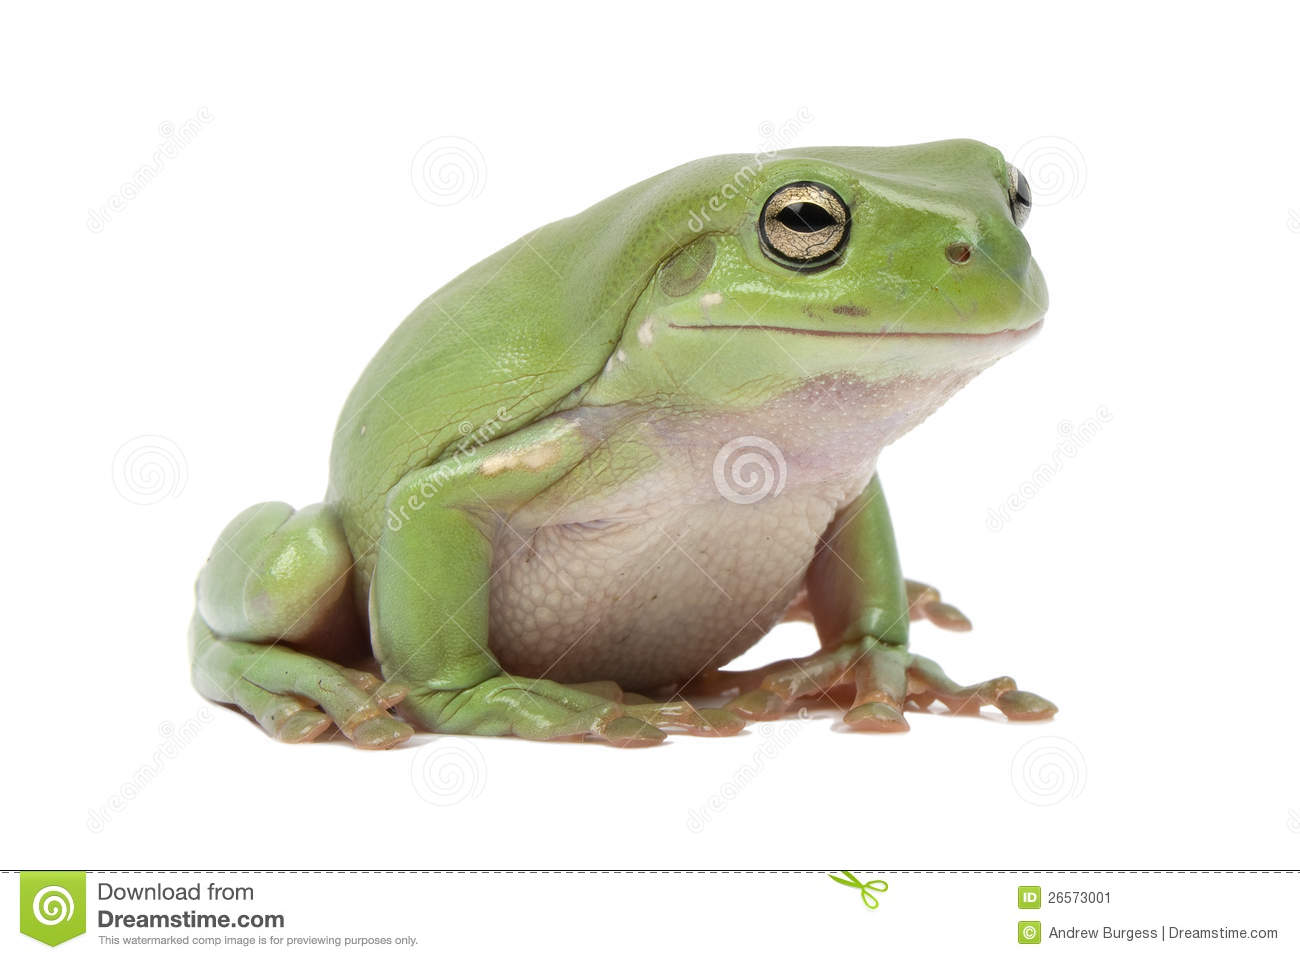 Magnificent Tree Frog clipart #4, Download drawings